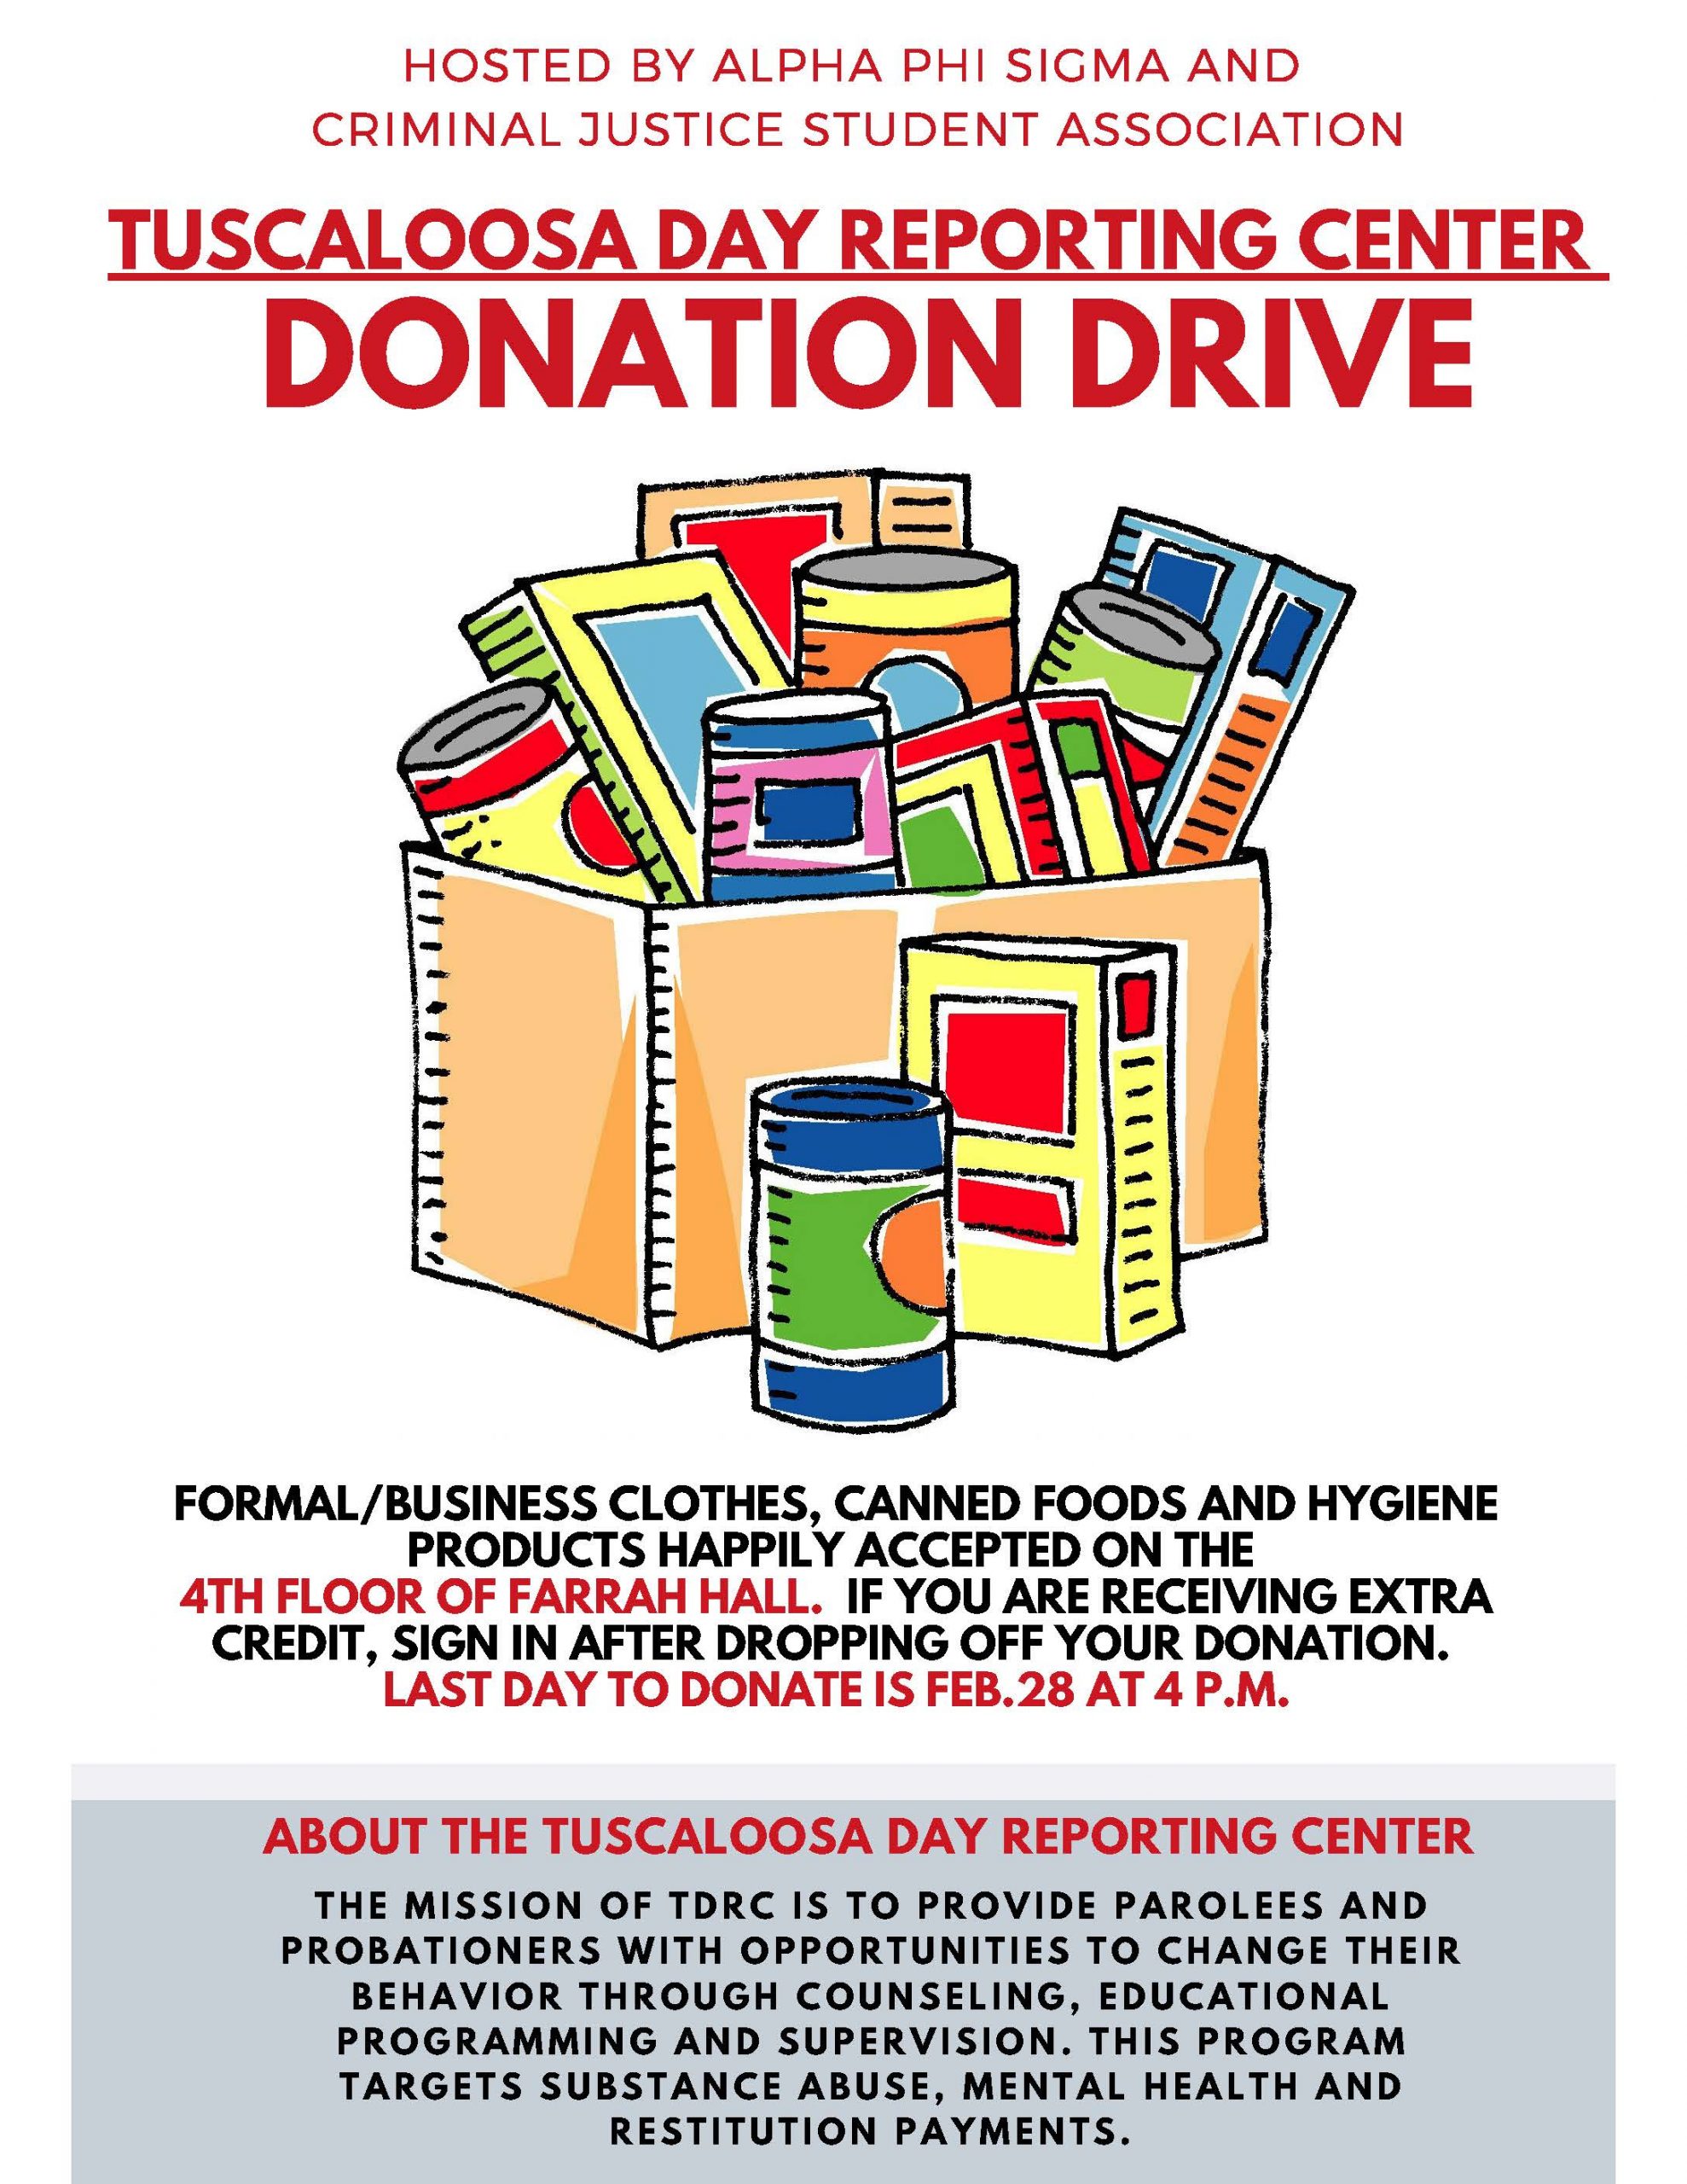 Donation Drive for the Tuscaloosa Day Reporting Center Criminology